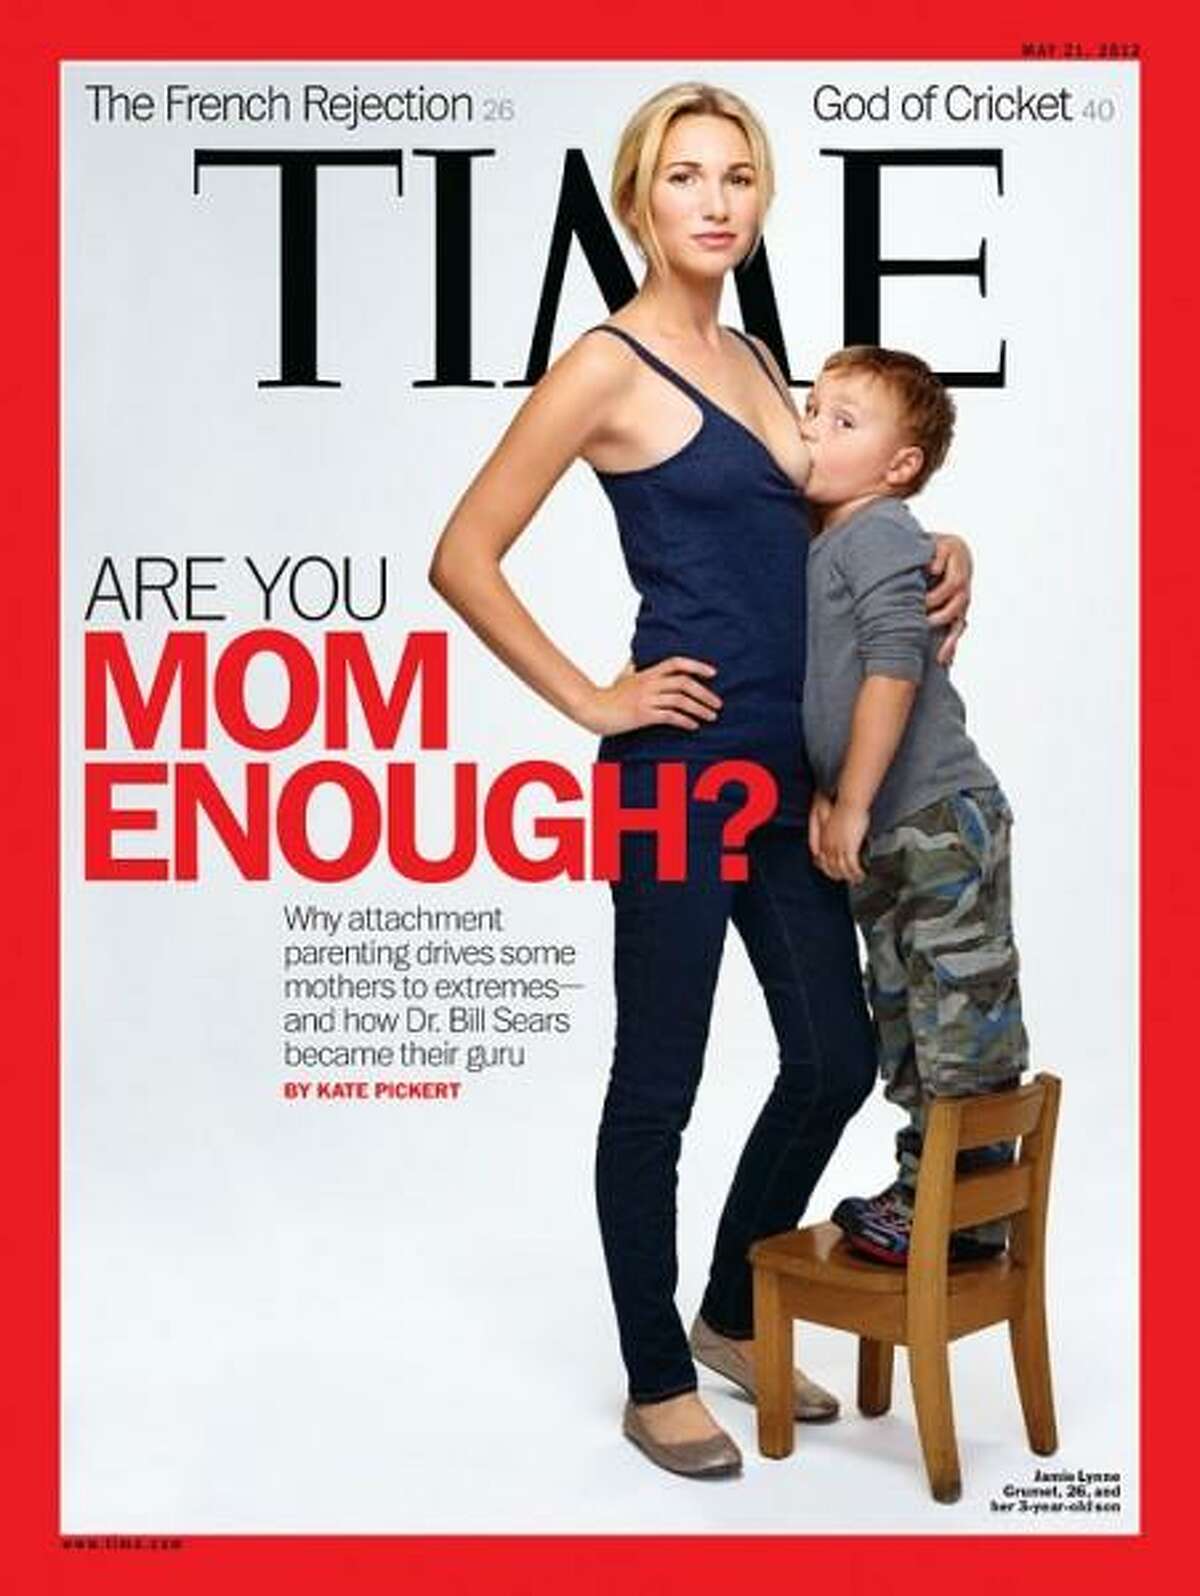 Is breastfeeding a 3-year-old freakish or natural? That's what people across America were asking in May 2012 when 'Time' magazine featured 26-year-old Jamie Lynne Grumet breastfeeding her son who looks old enough to pour himself a glass of milk.